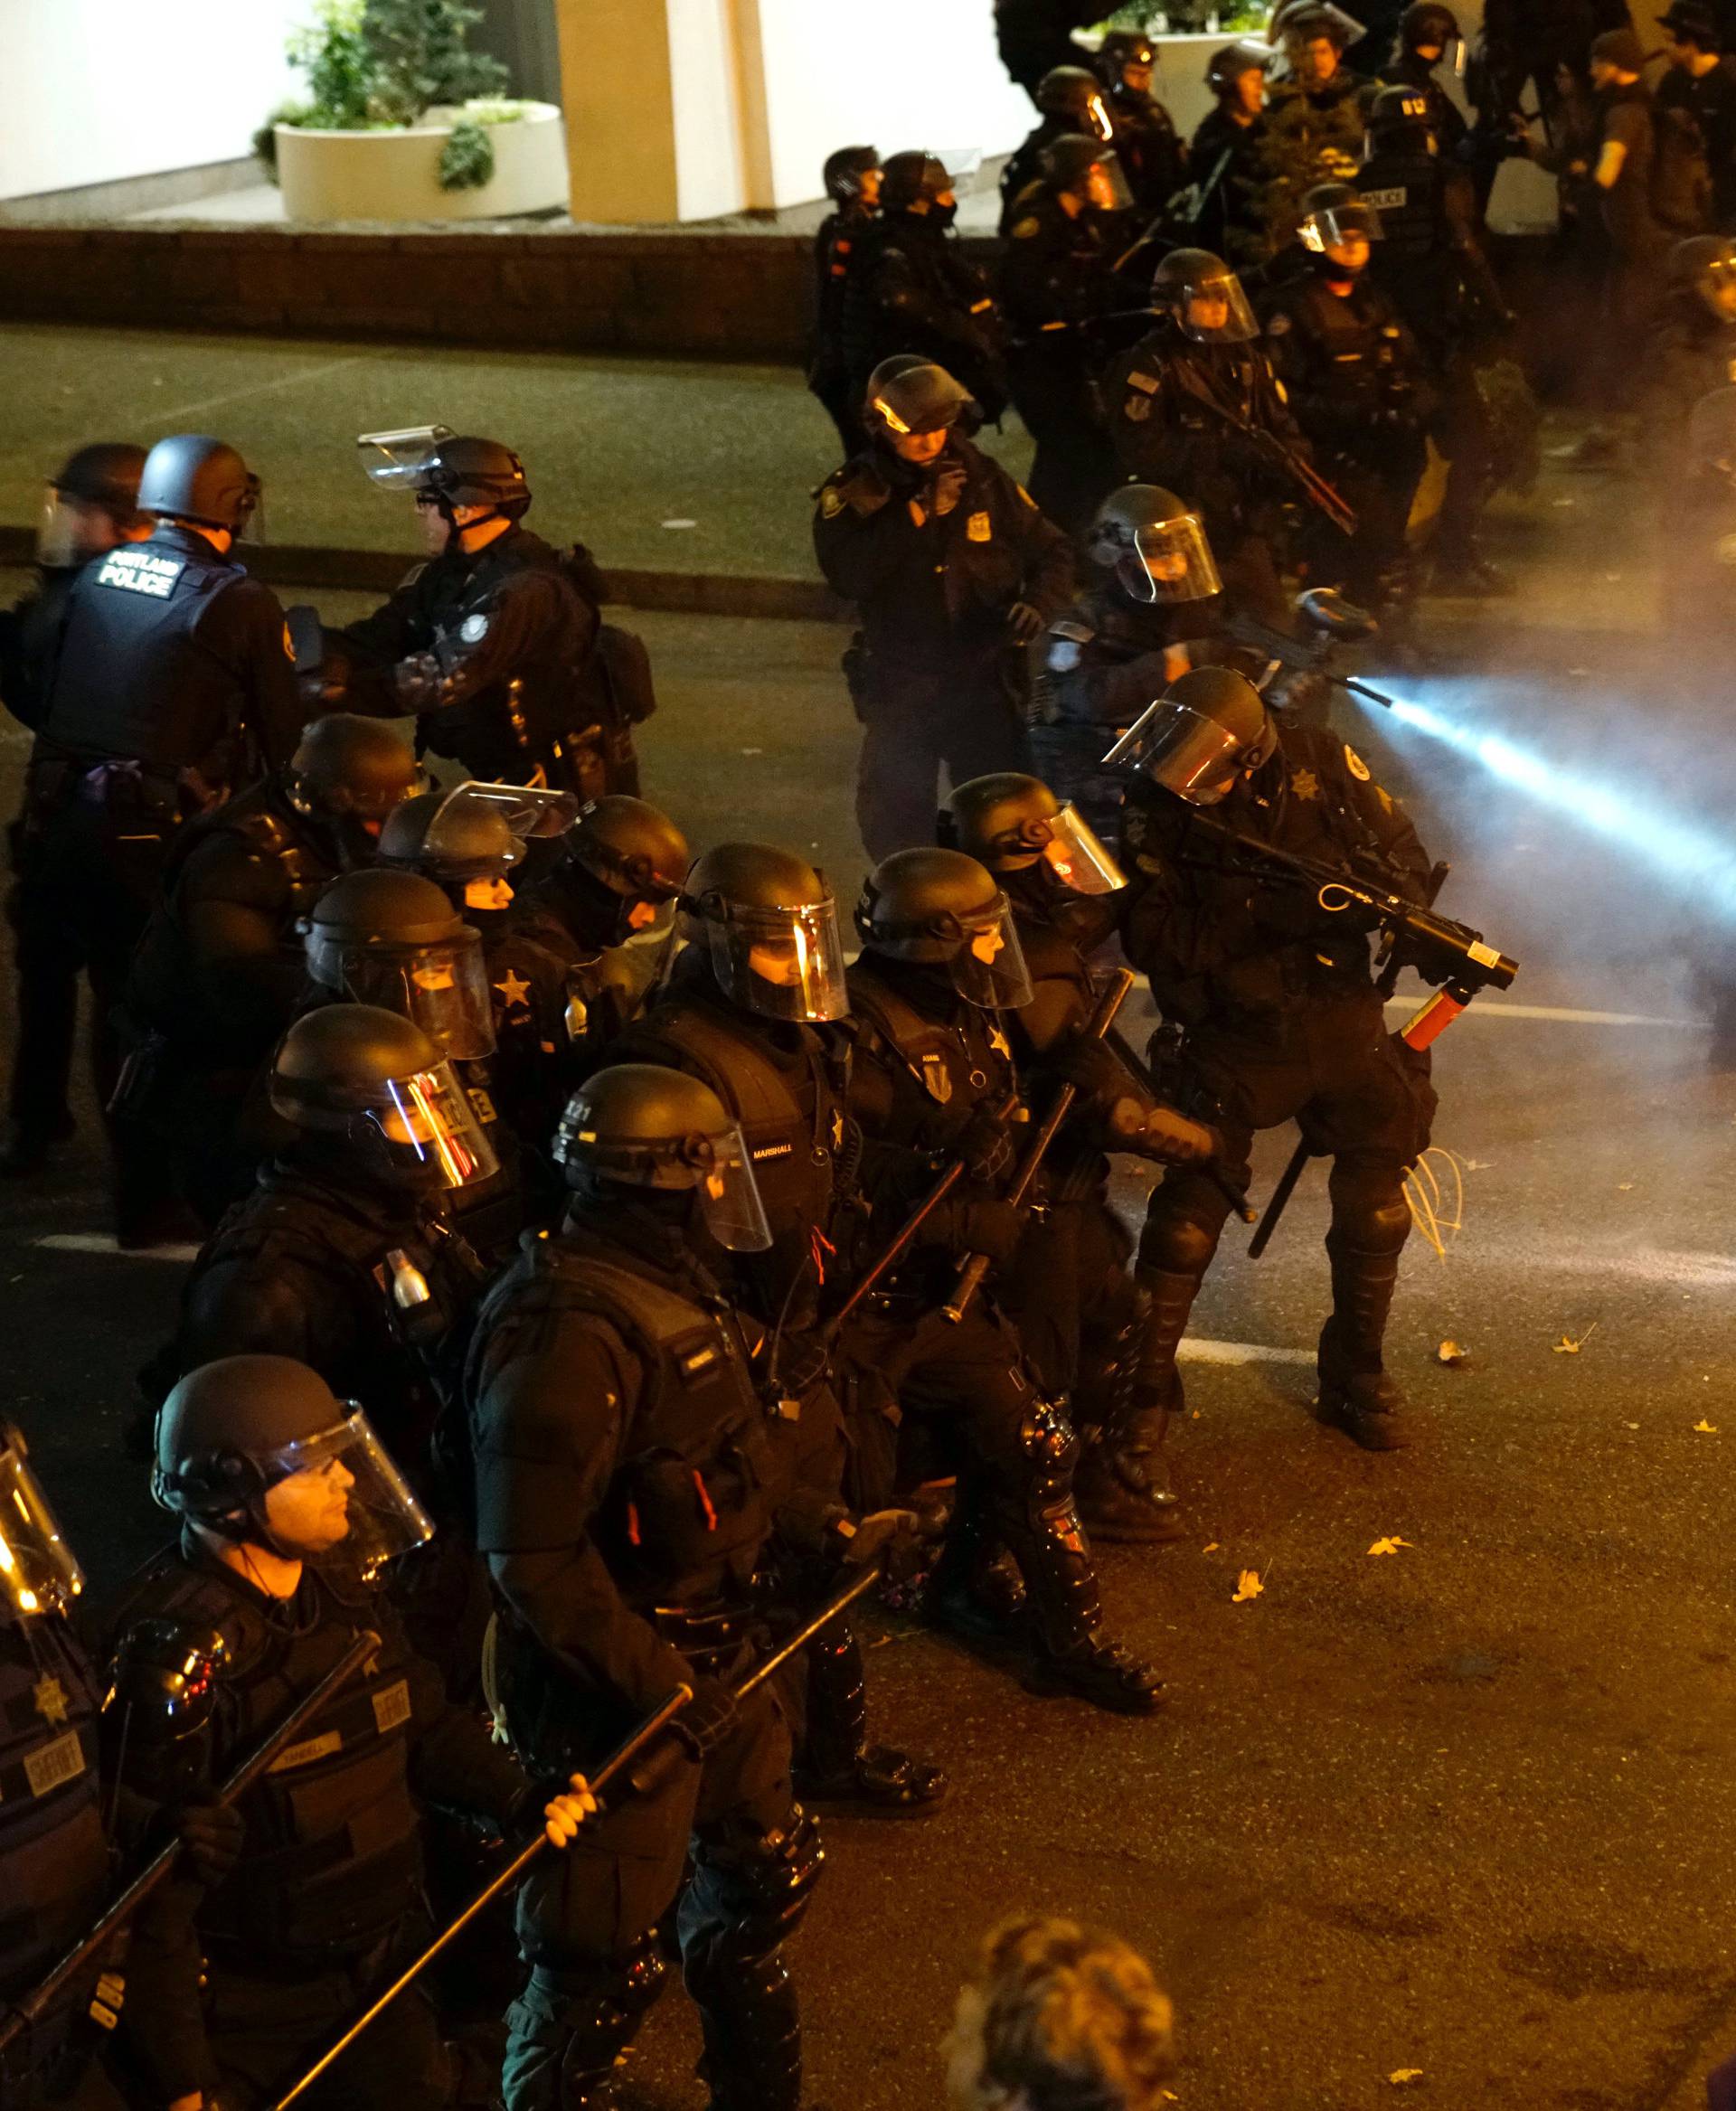 A police officer sprays the crowd with an irritant during a protest against the election of Republican Donald Trump as President of the United States in Portland, Oregon